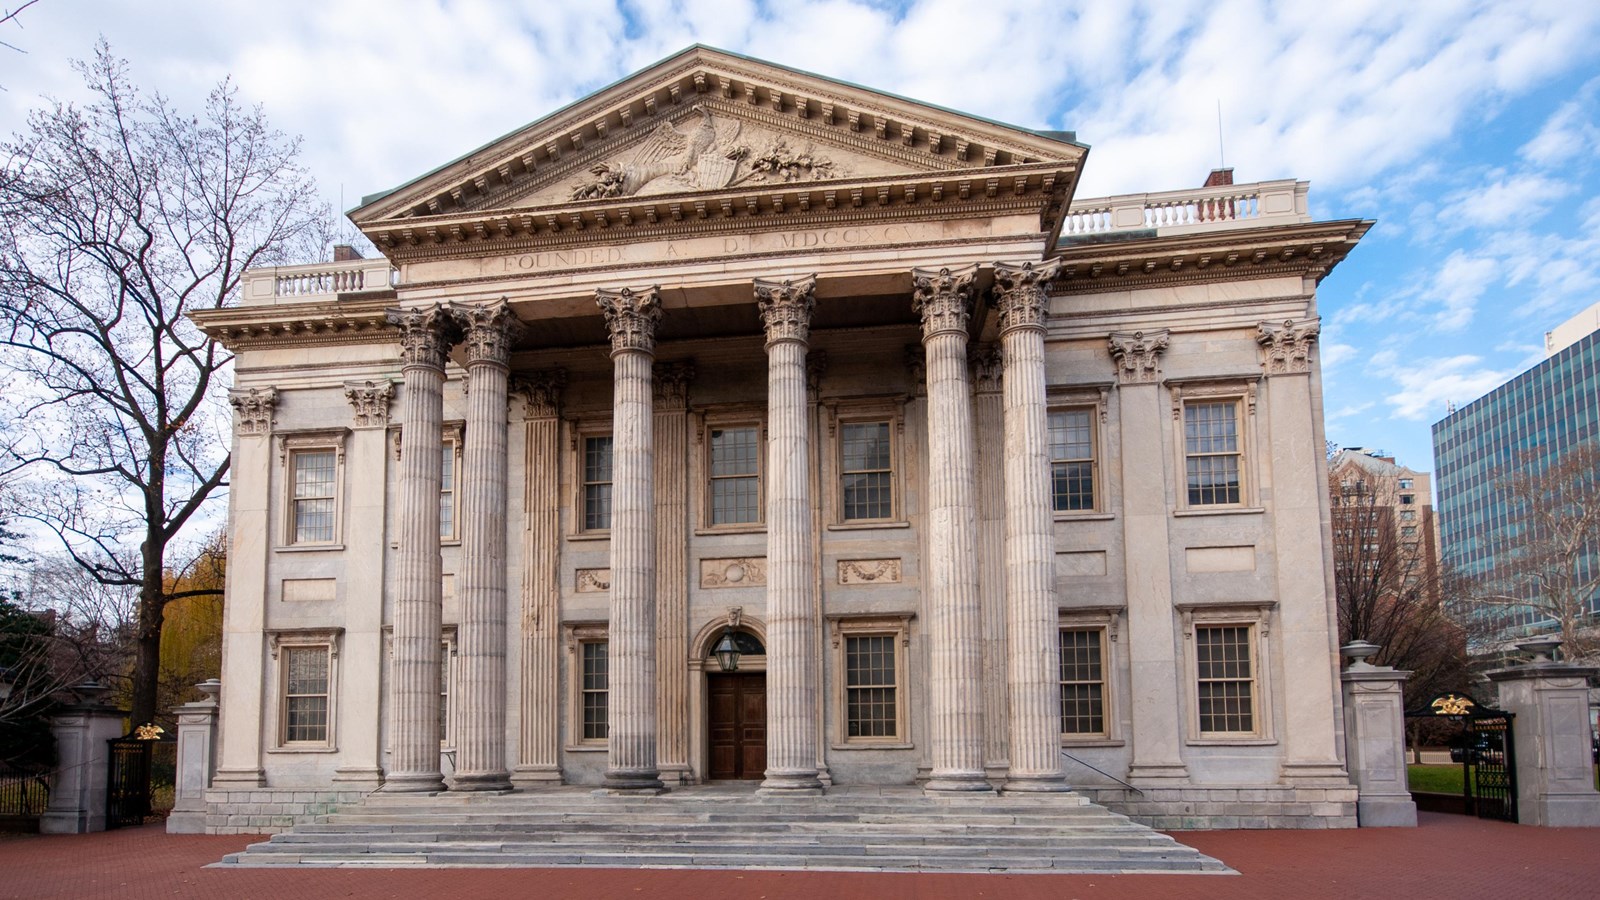 A color photo of a two-story marble building with multiple columns supporting a triangular pediment.